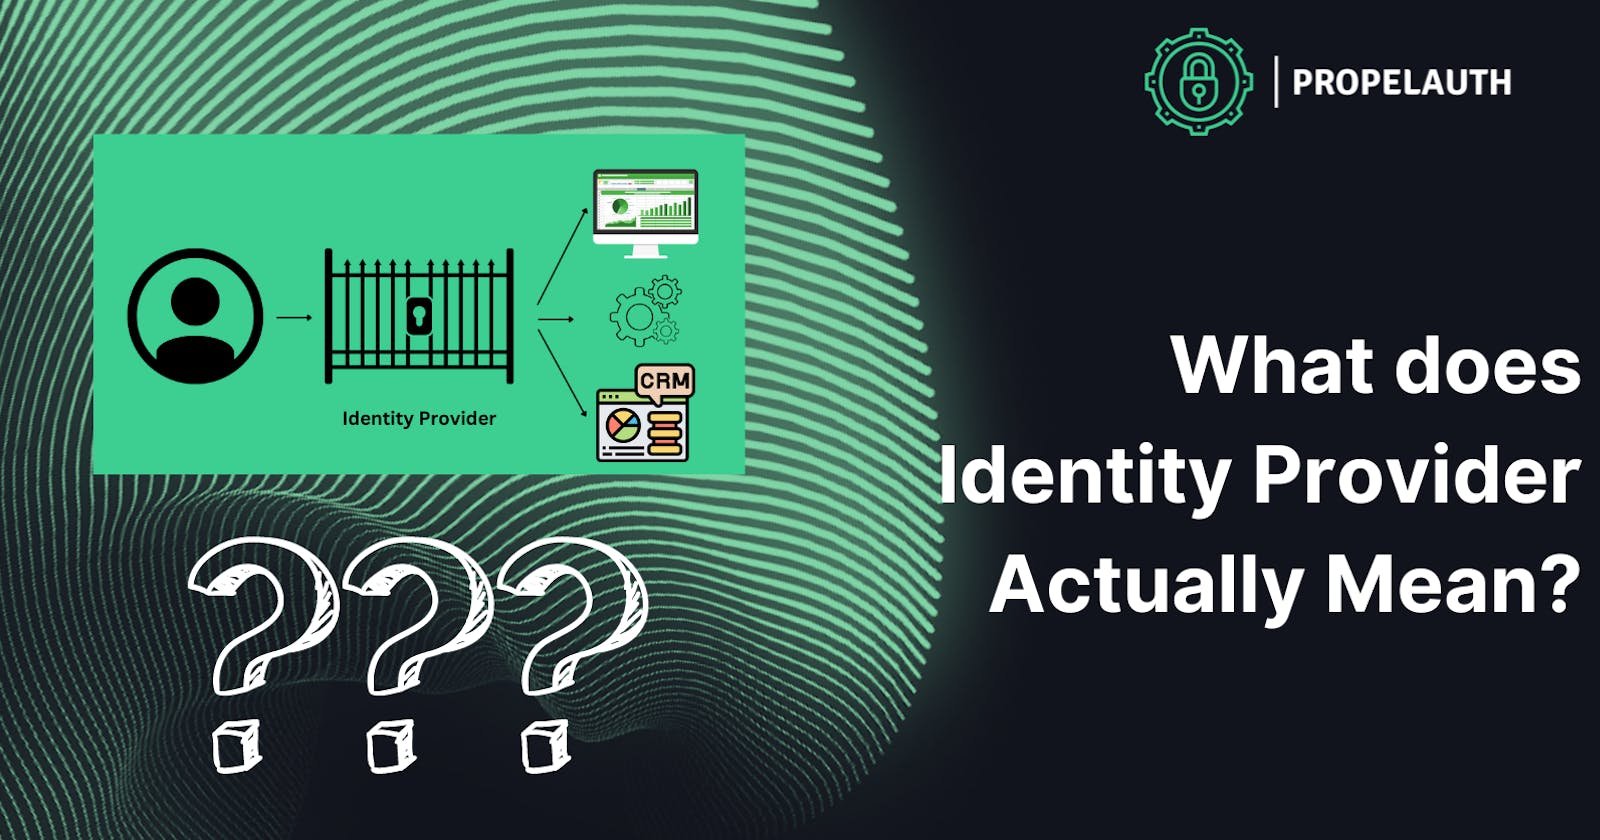 What Does Identity Provider Actually Mean?